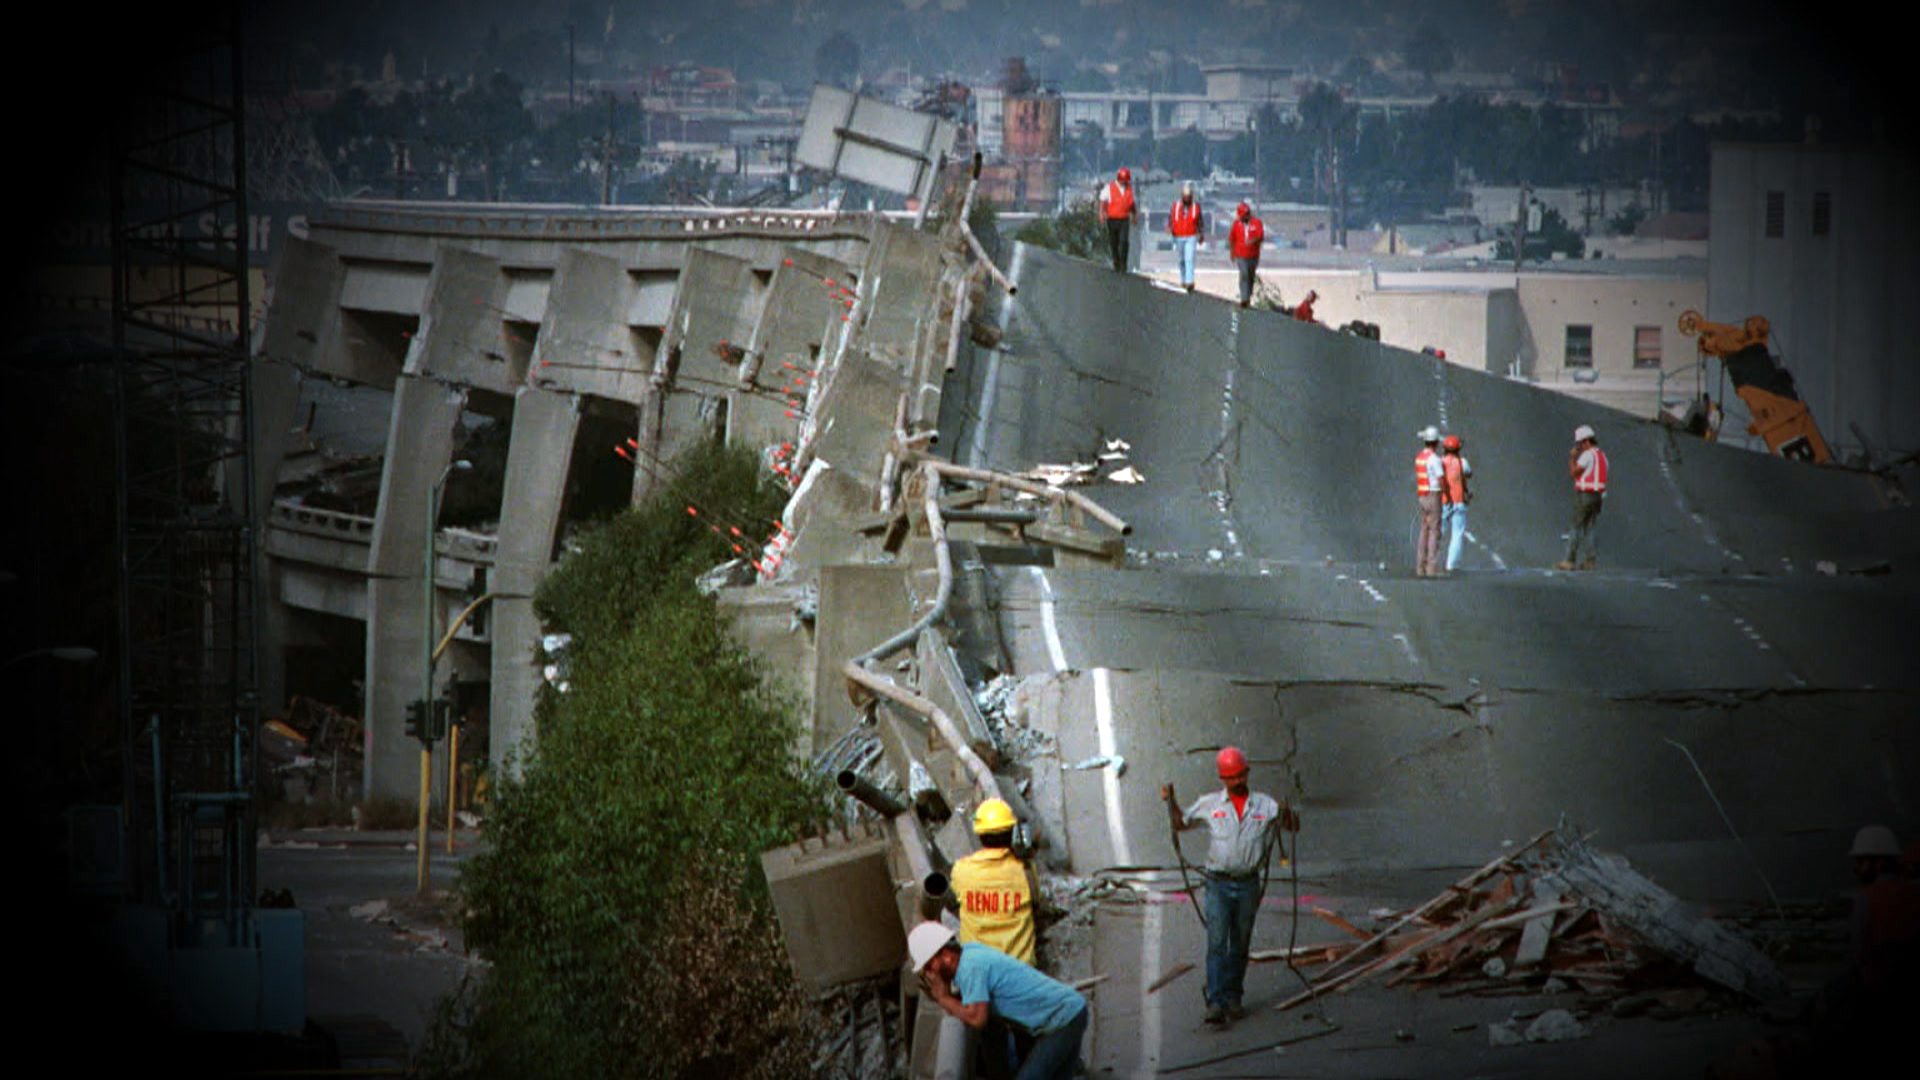 Looking Back At 89 Loma Prieta Quake Planning For Next One